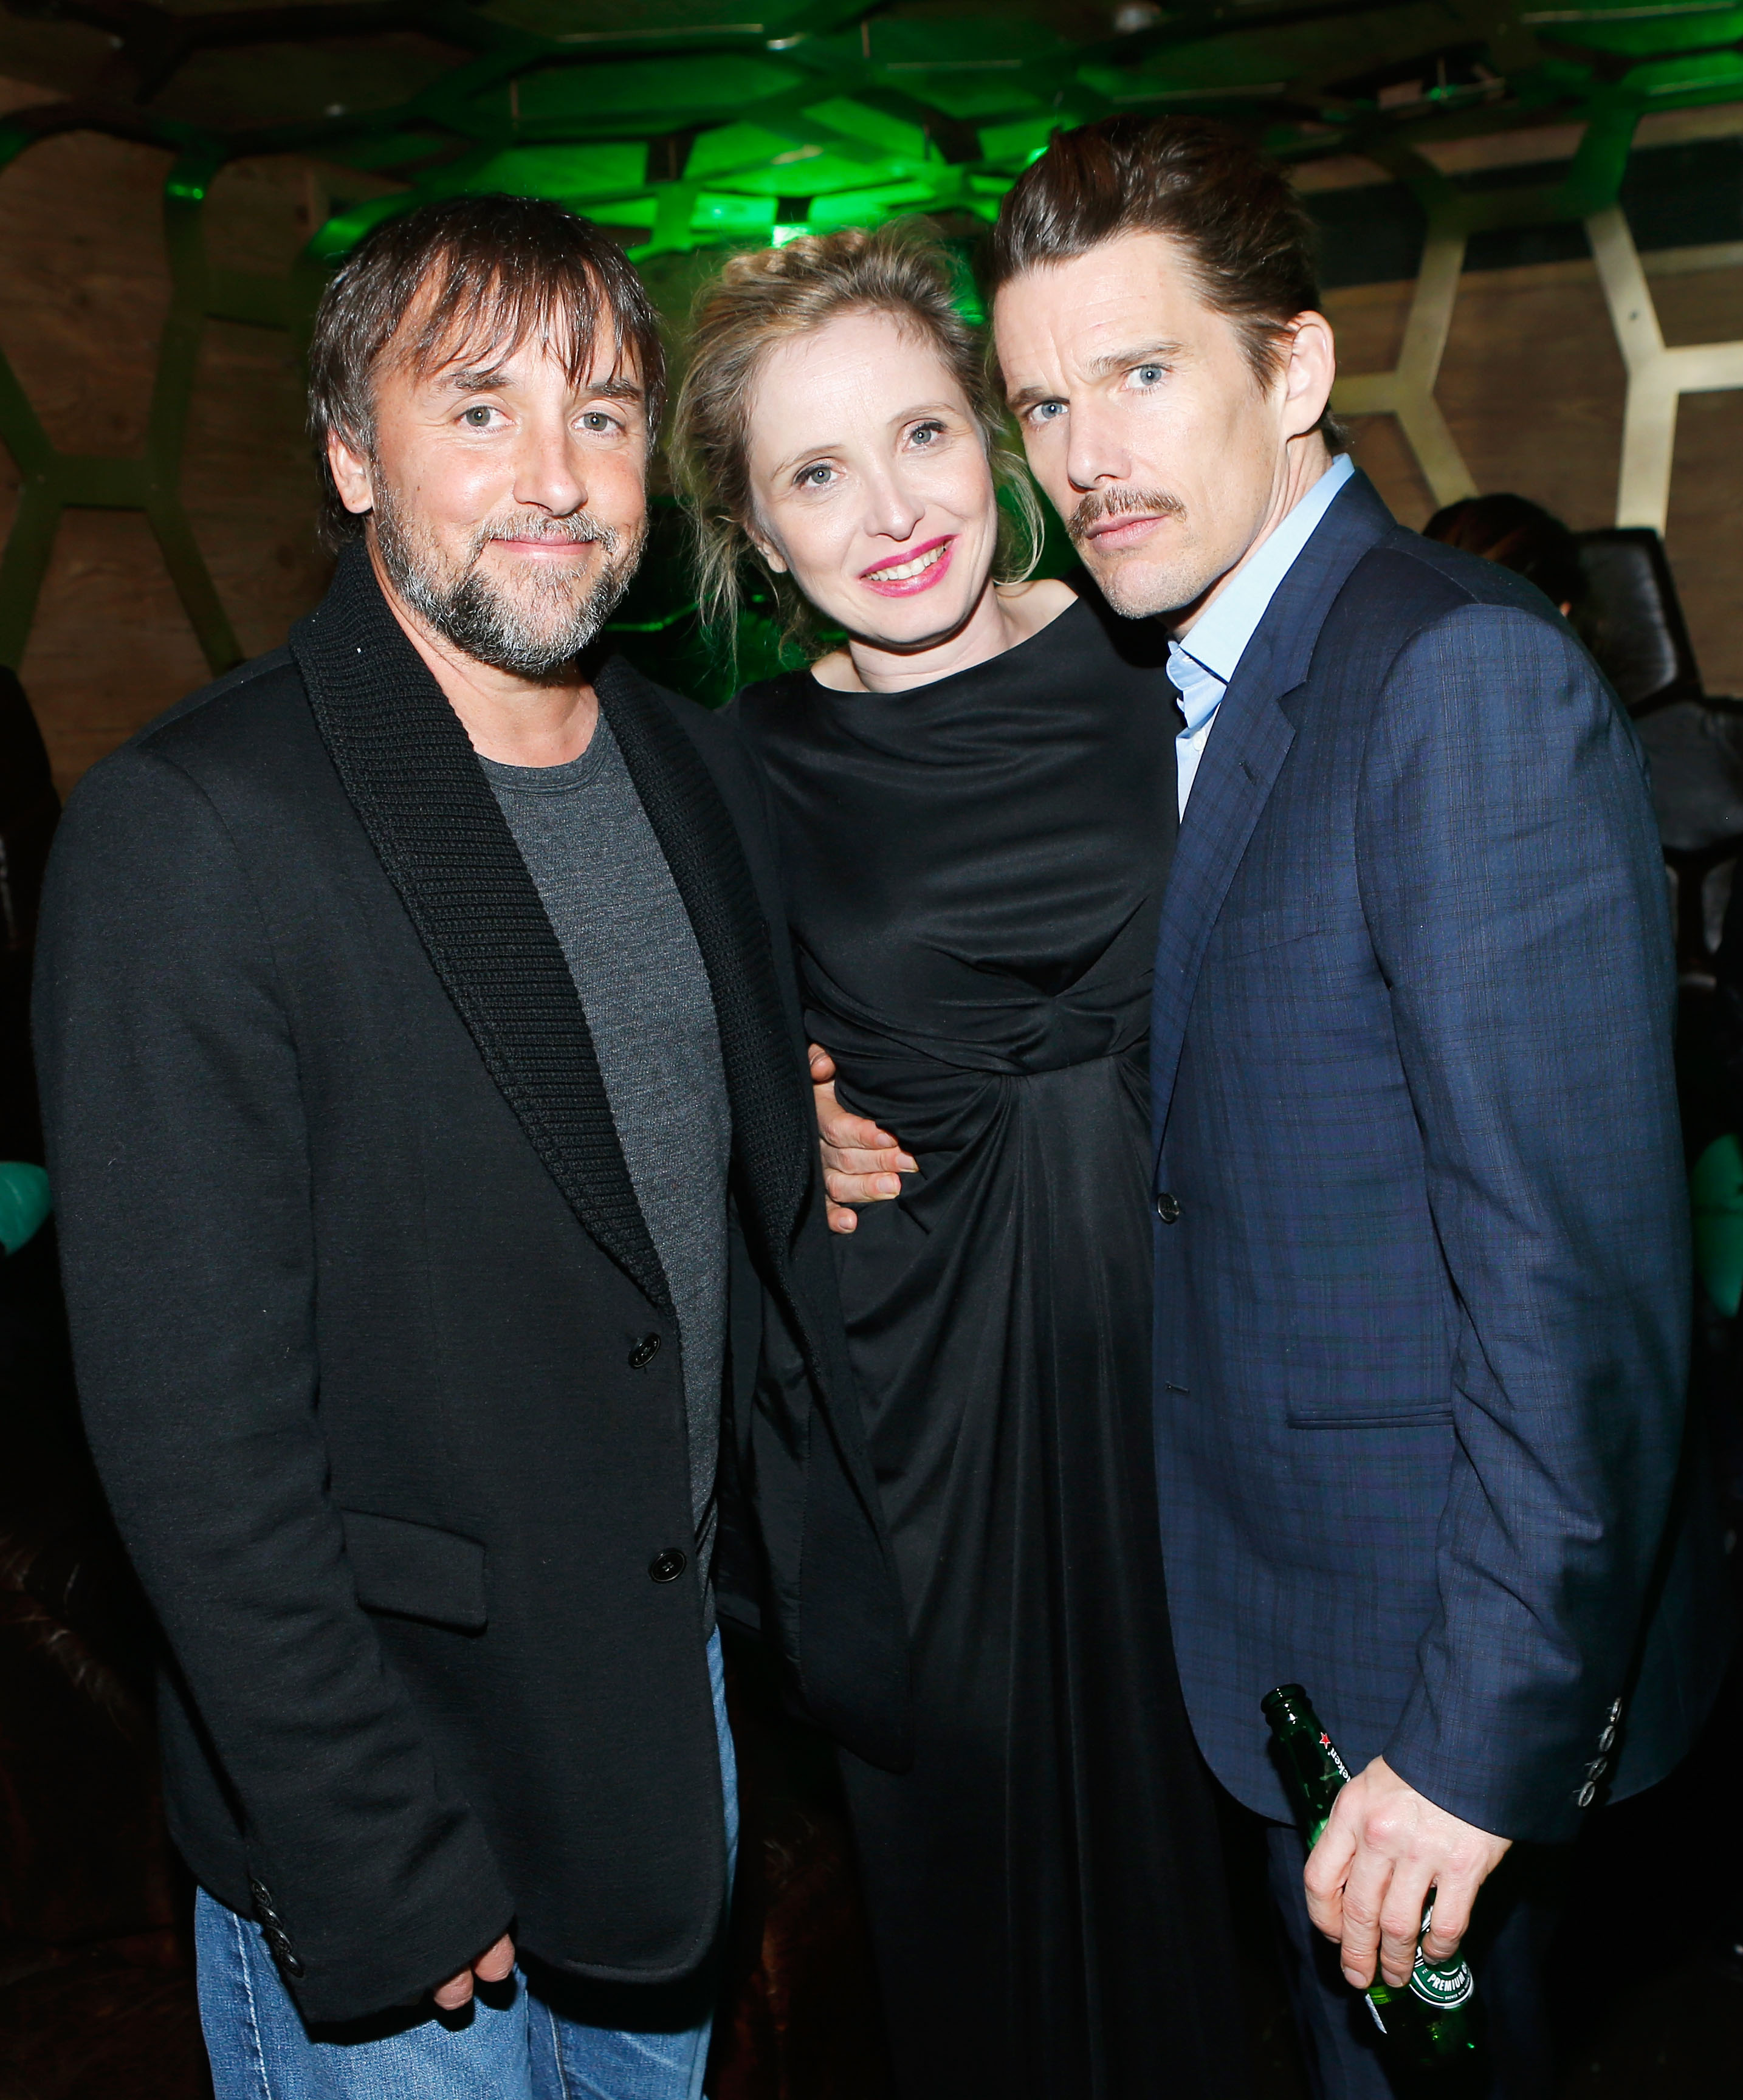 NEW YORK, NY - APRIL 22:  Director and screenwriter Richard Linklater, Julie Delpy and Ethan Hawke attend the Tribeca Film Festival 2013 After Party "Before Midnight" sponsored by Heineken on April 22, 2013 in New York City.  (Photo by Jemal Countess/Getty Images for 2013 Tribeca Film Festival)